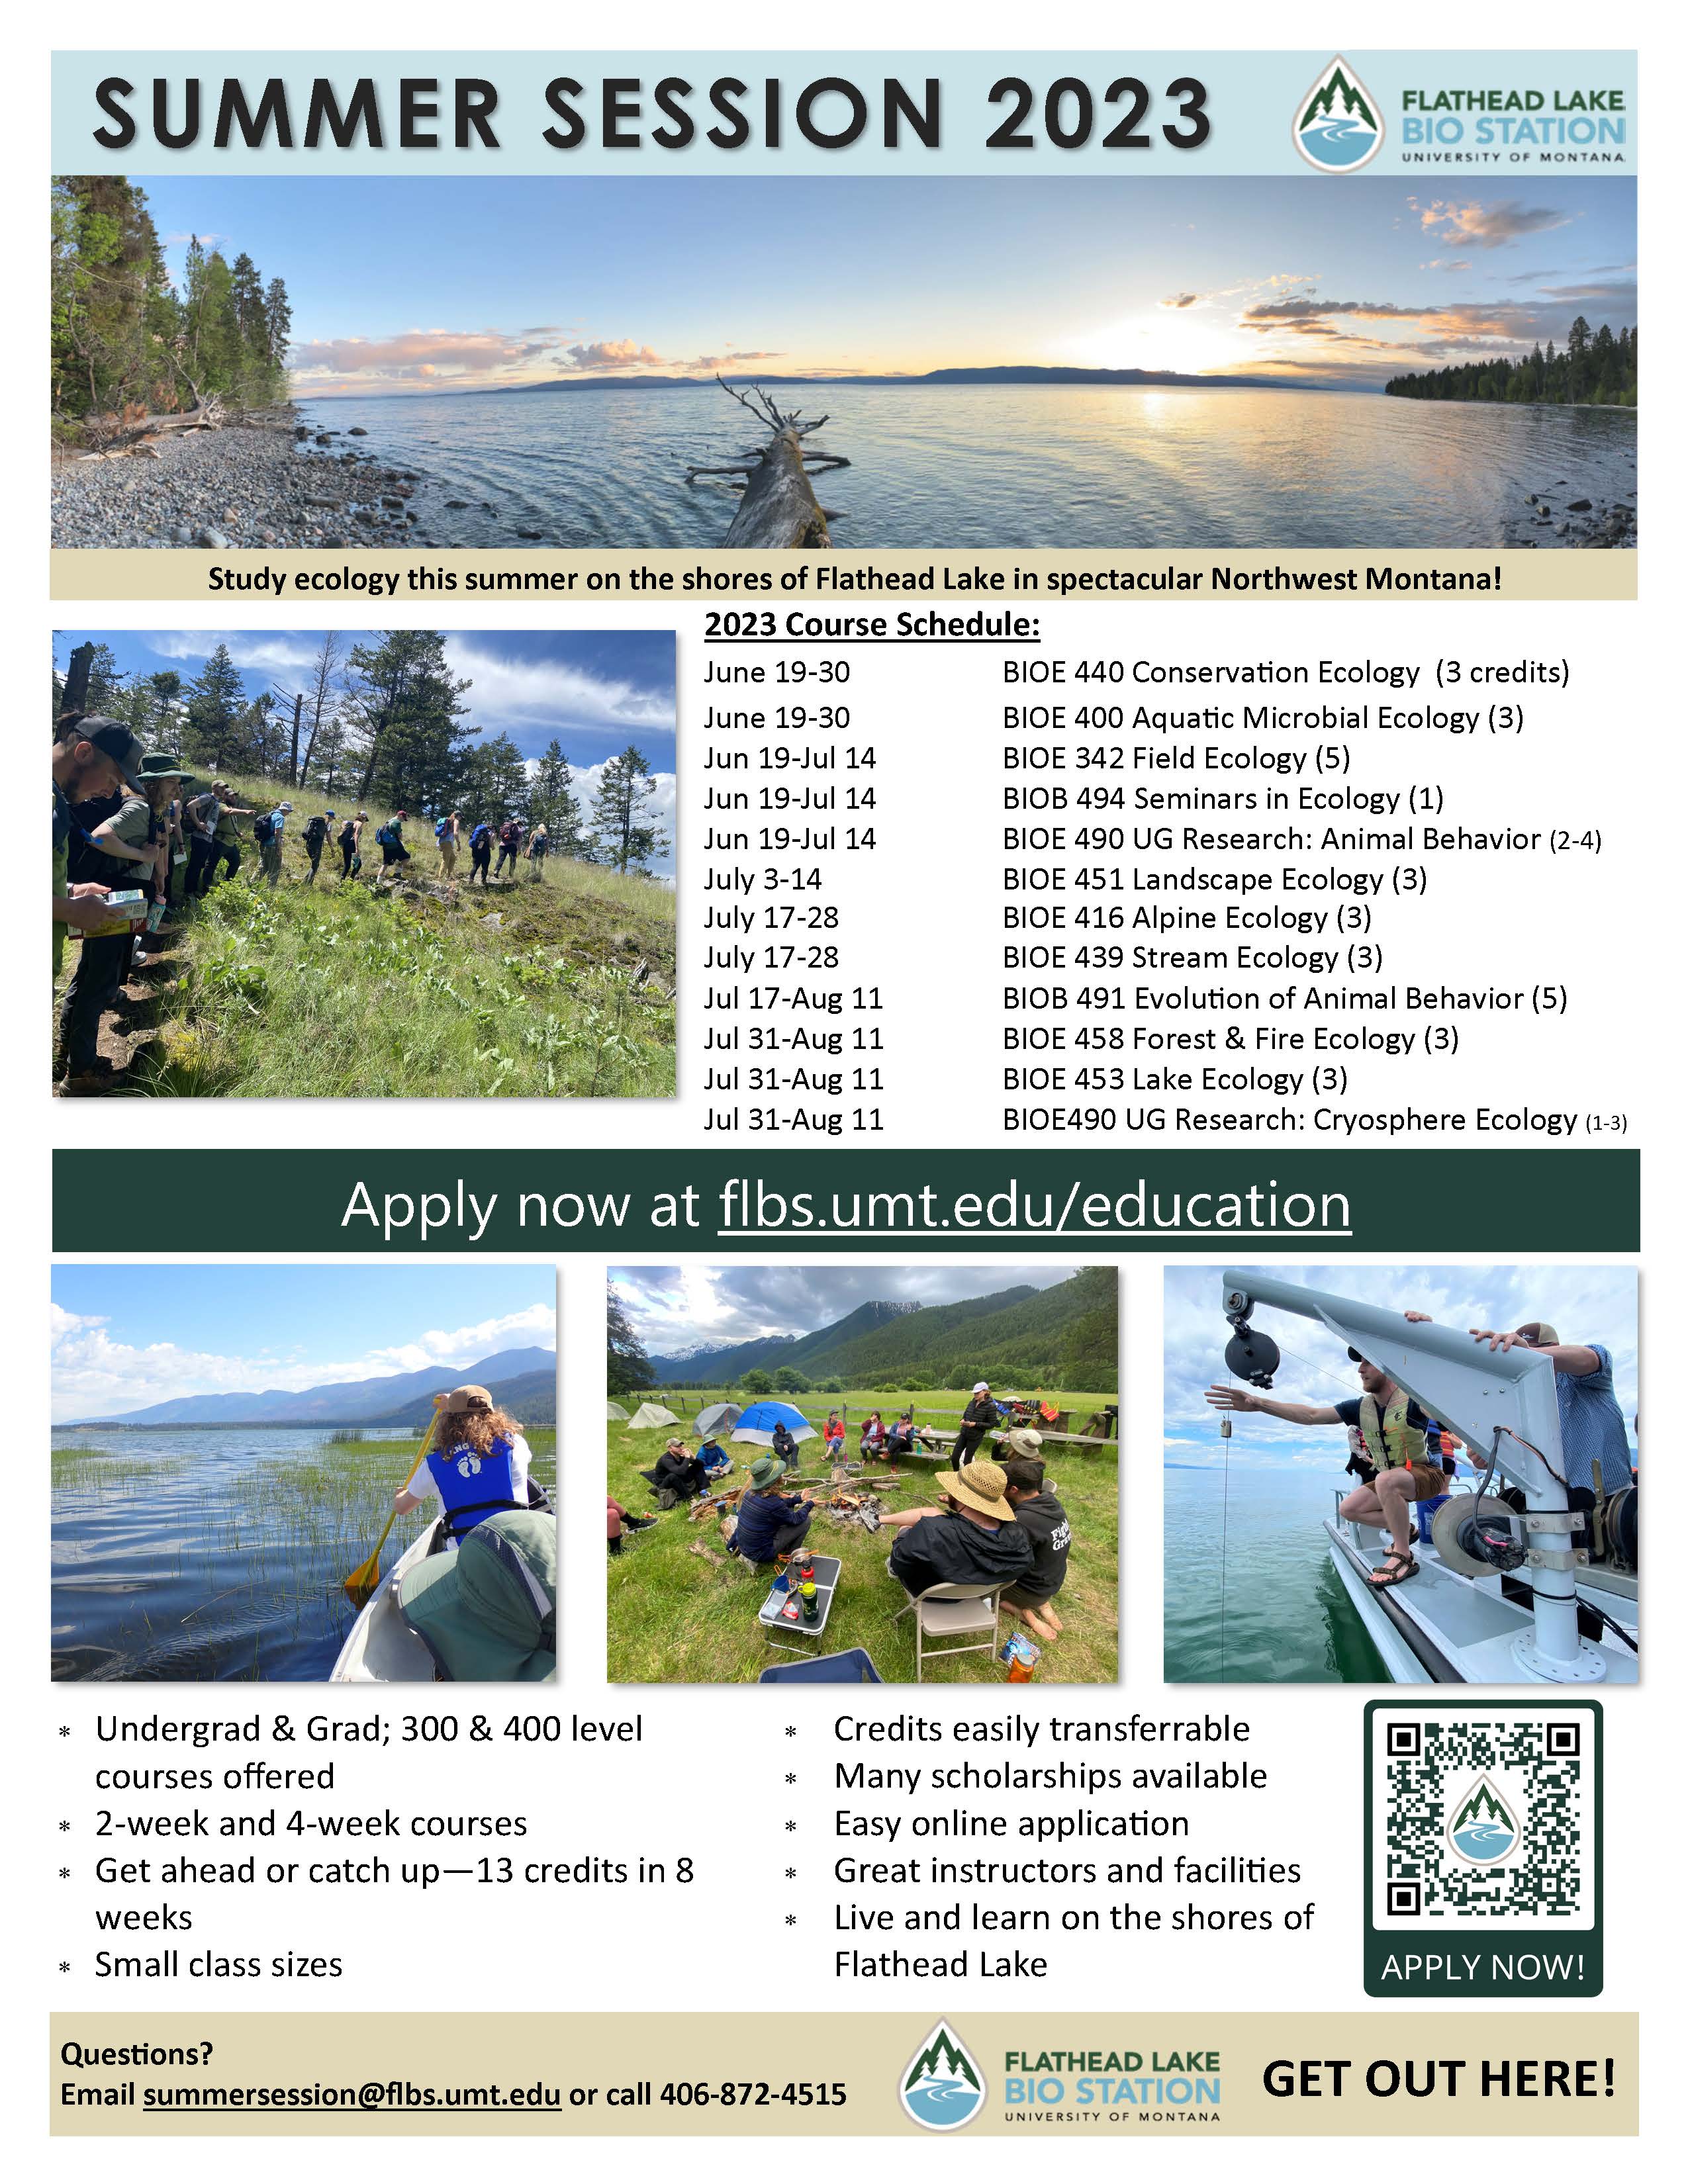 FLBS one page flier with summer course schedule, program highlights and images of students doing fieldwork